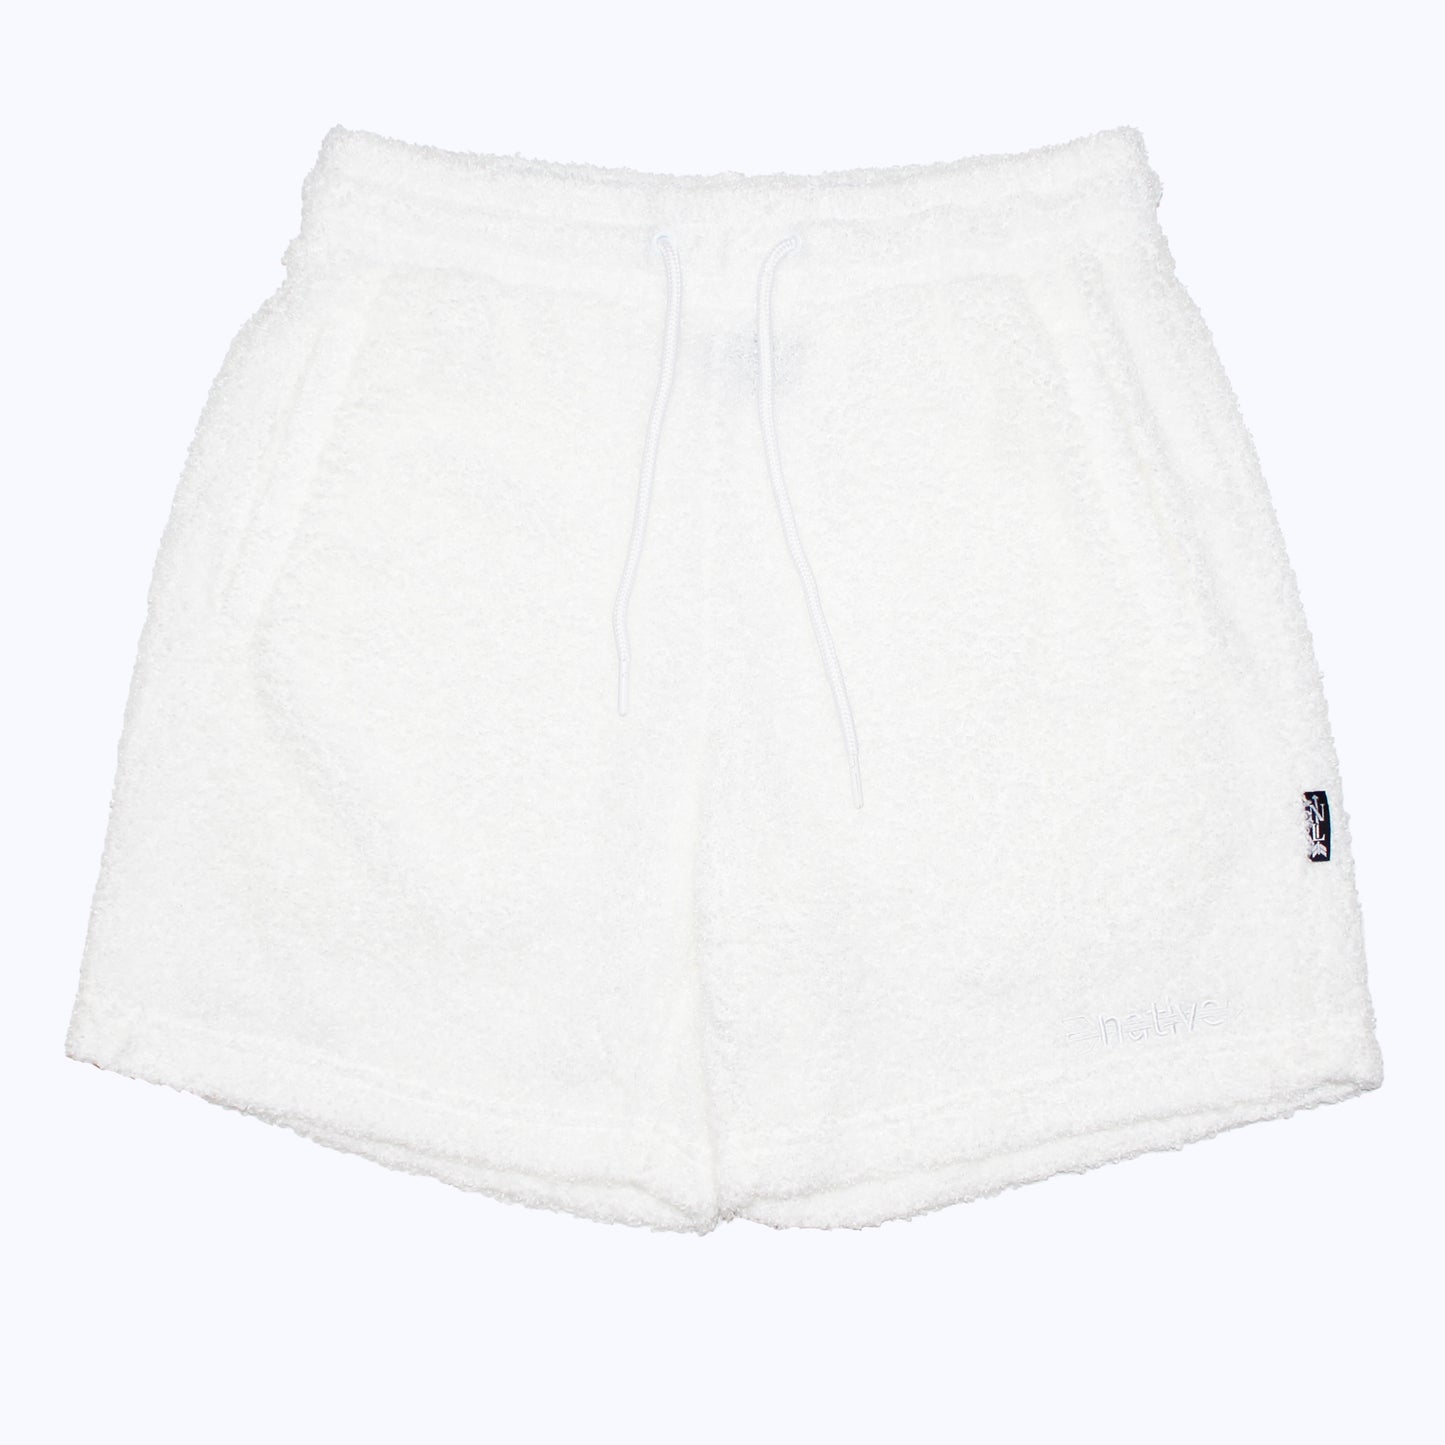 sherpa shorts in whiteout